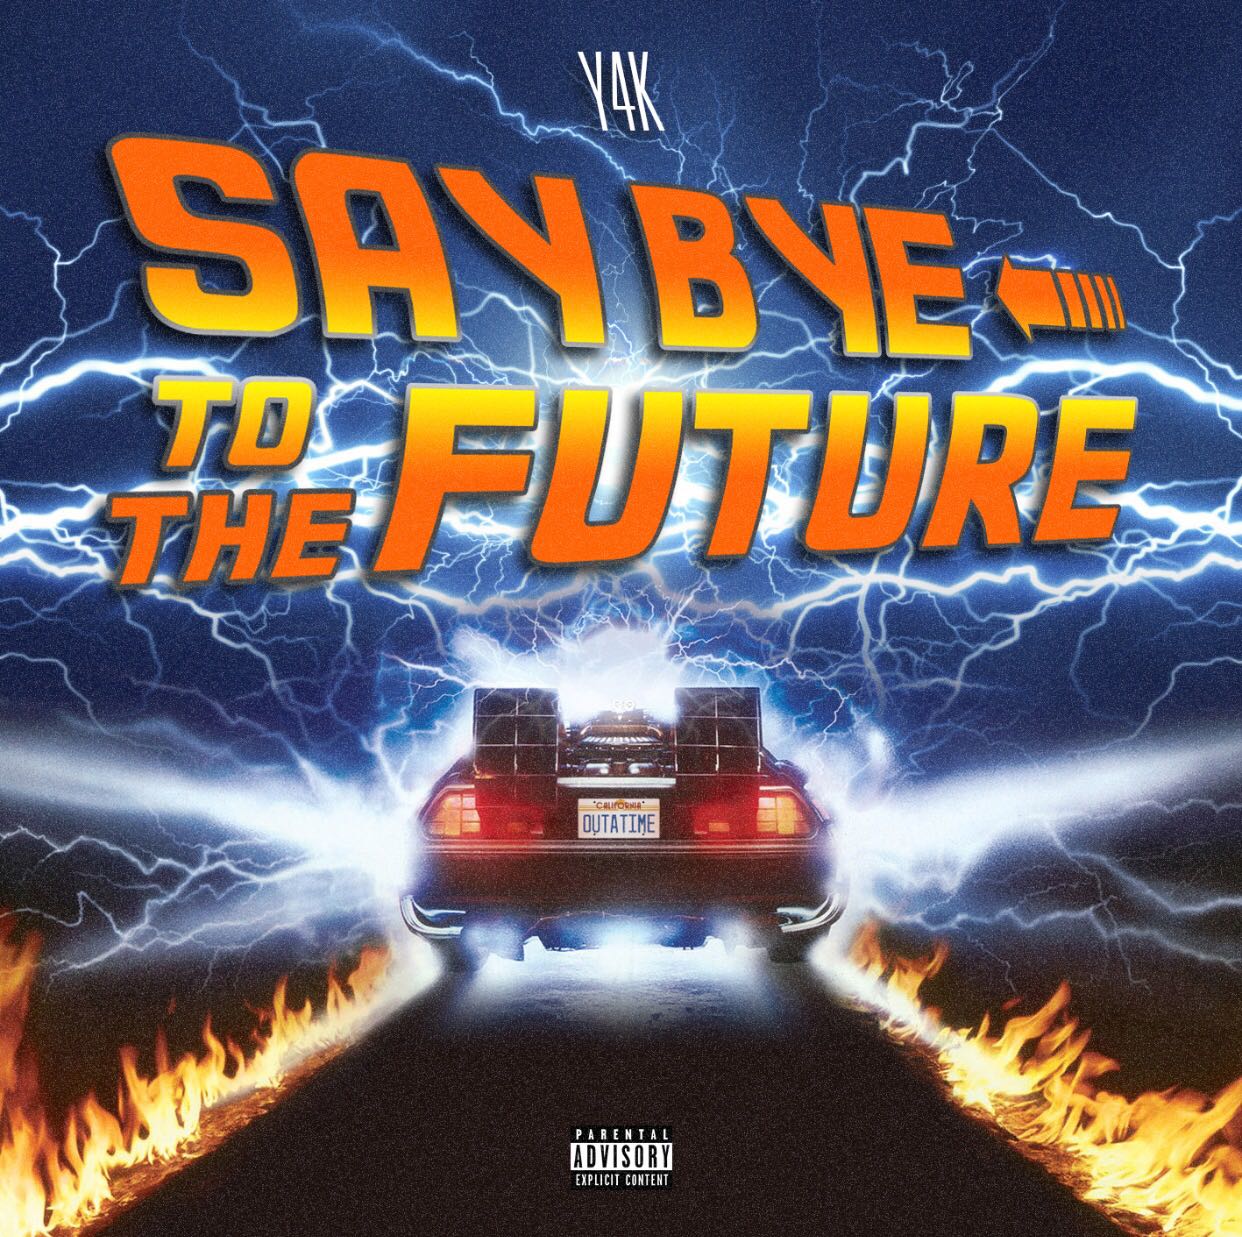 Say Bye To The Future Introduces Us To Y4K